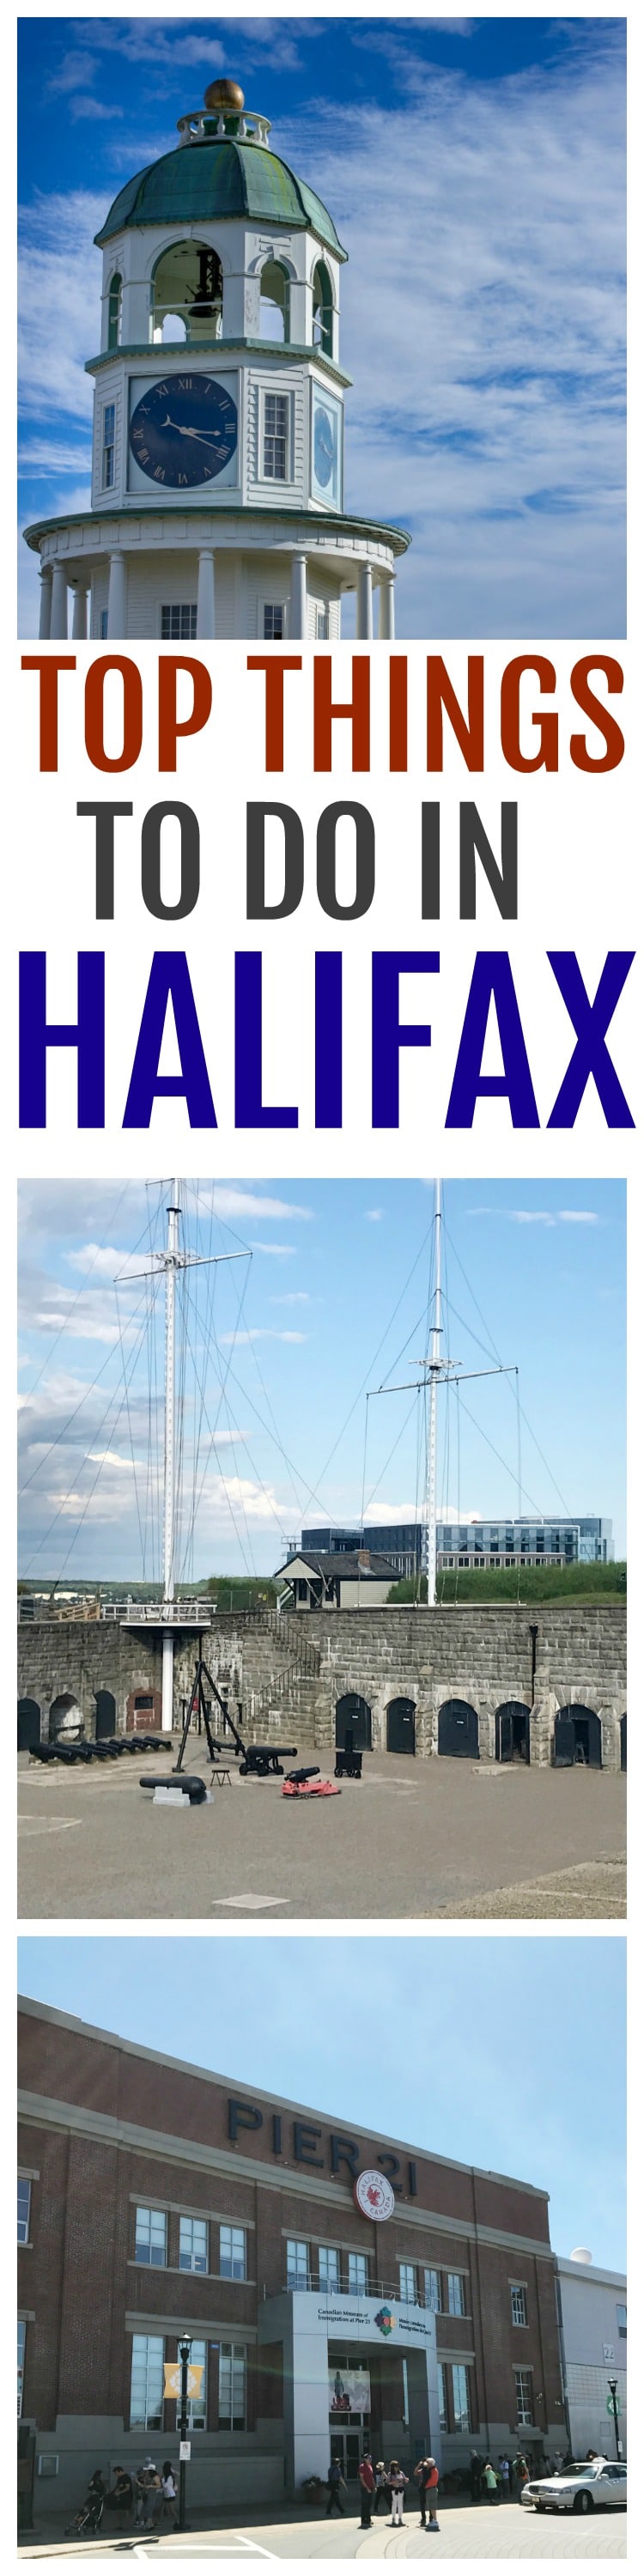 Things To Do in Halifax 